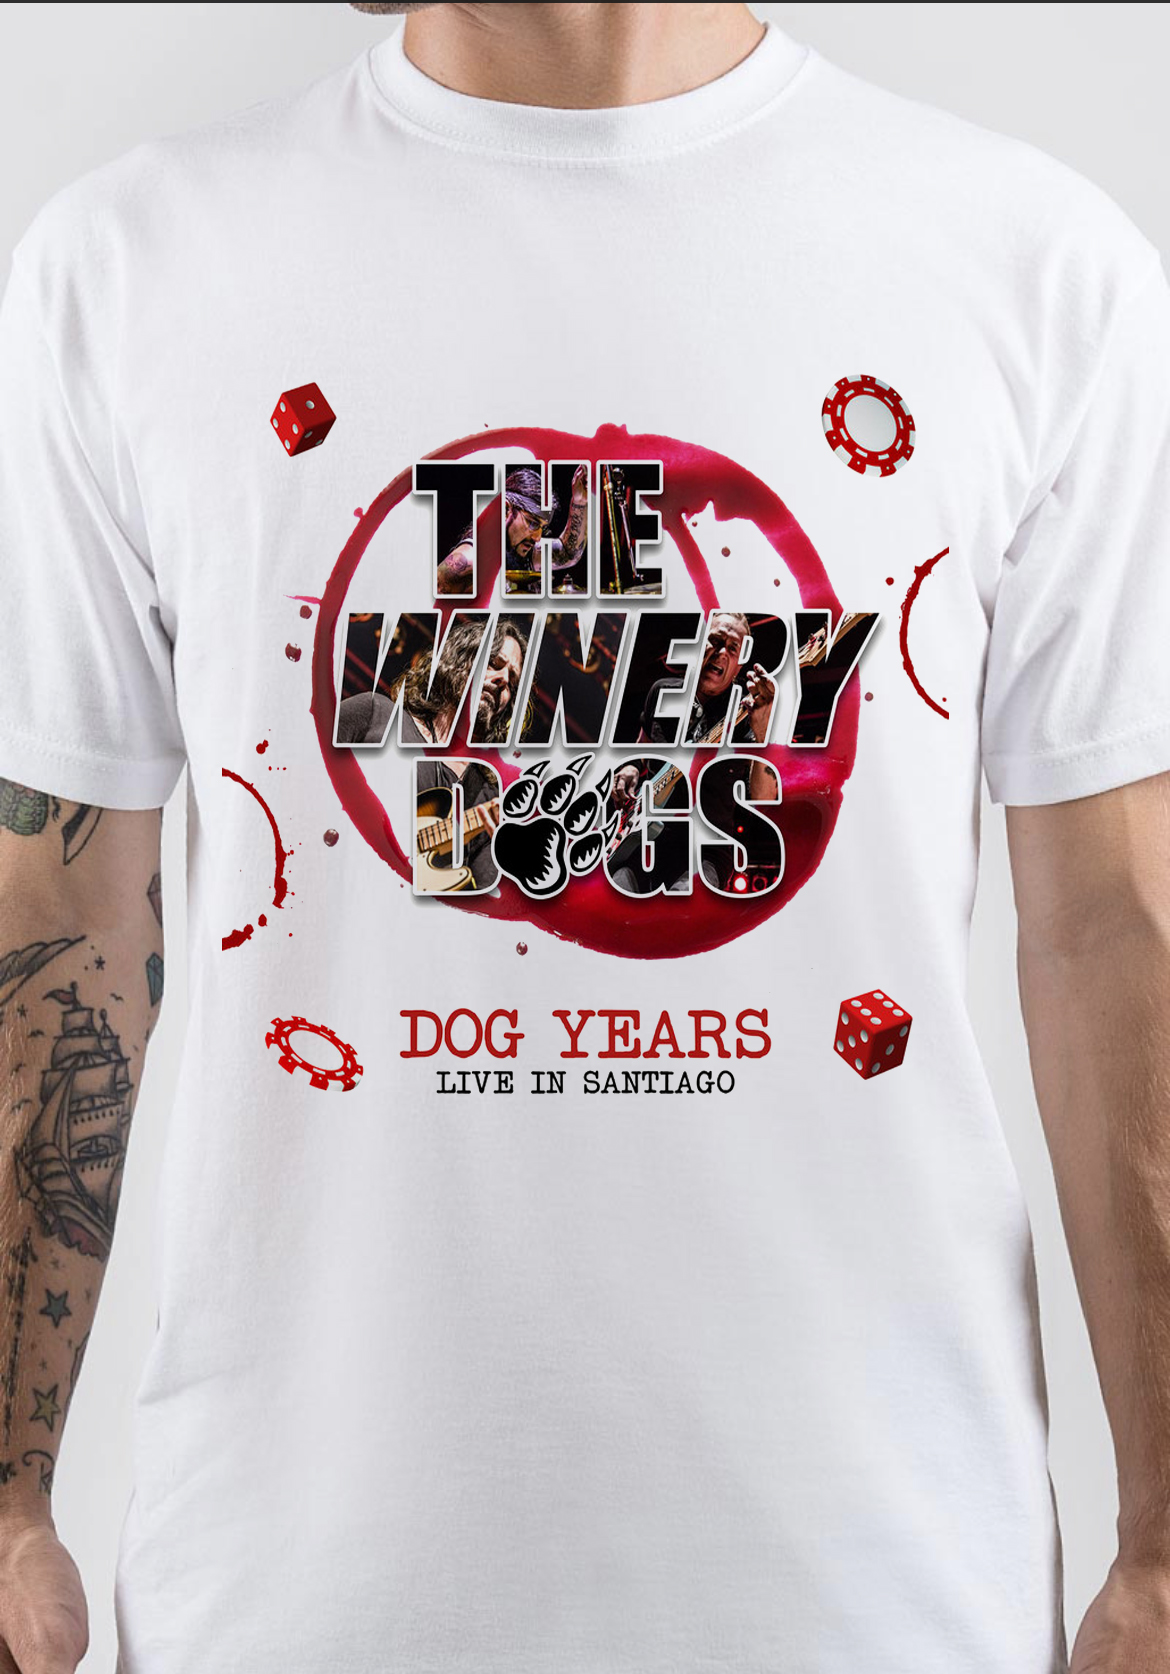 The Winery Dogs T-Shirt And Merchandise